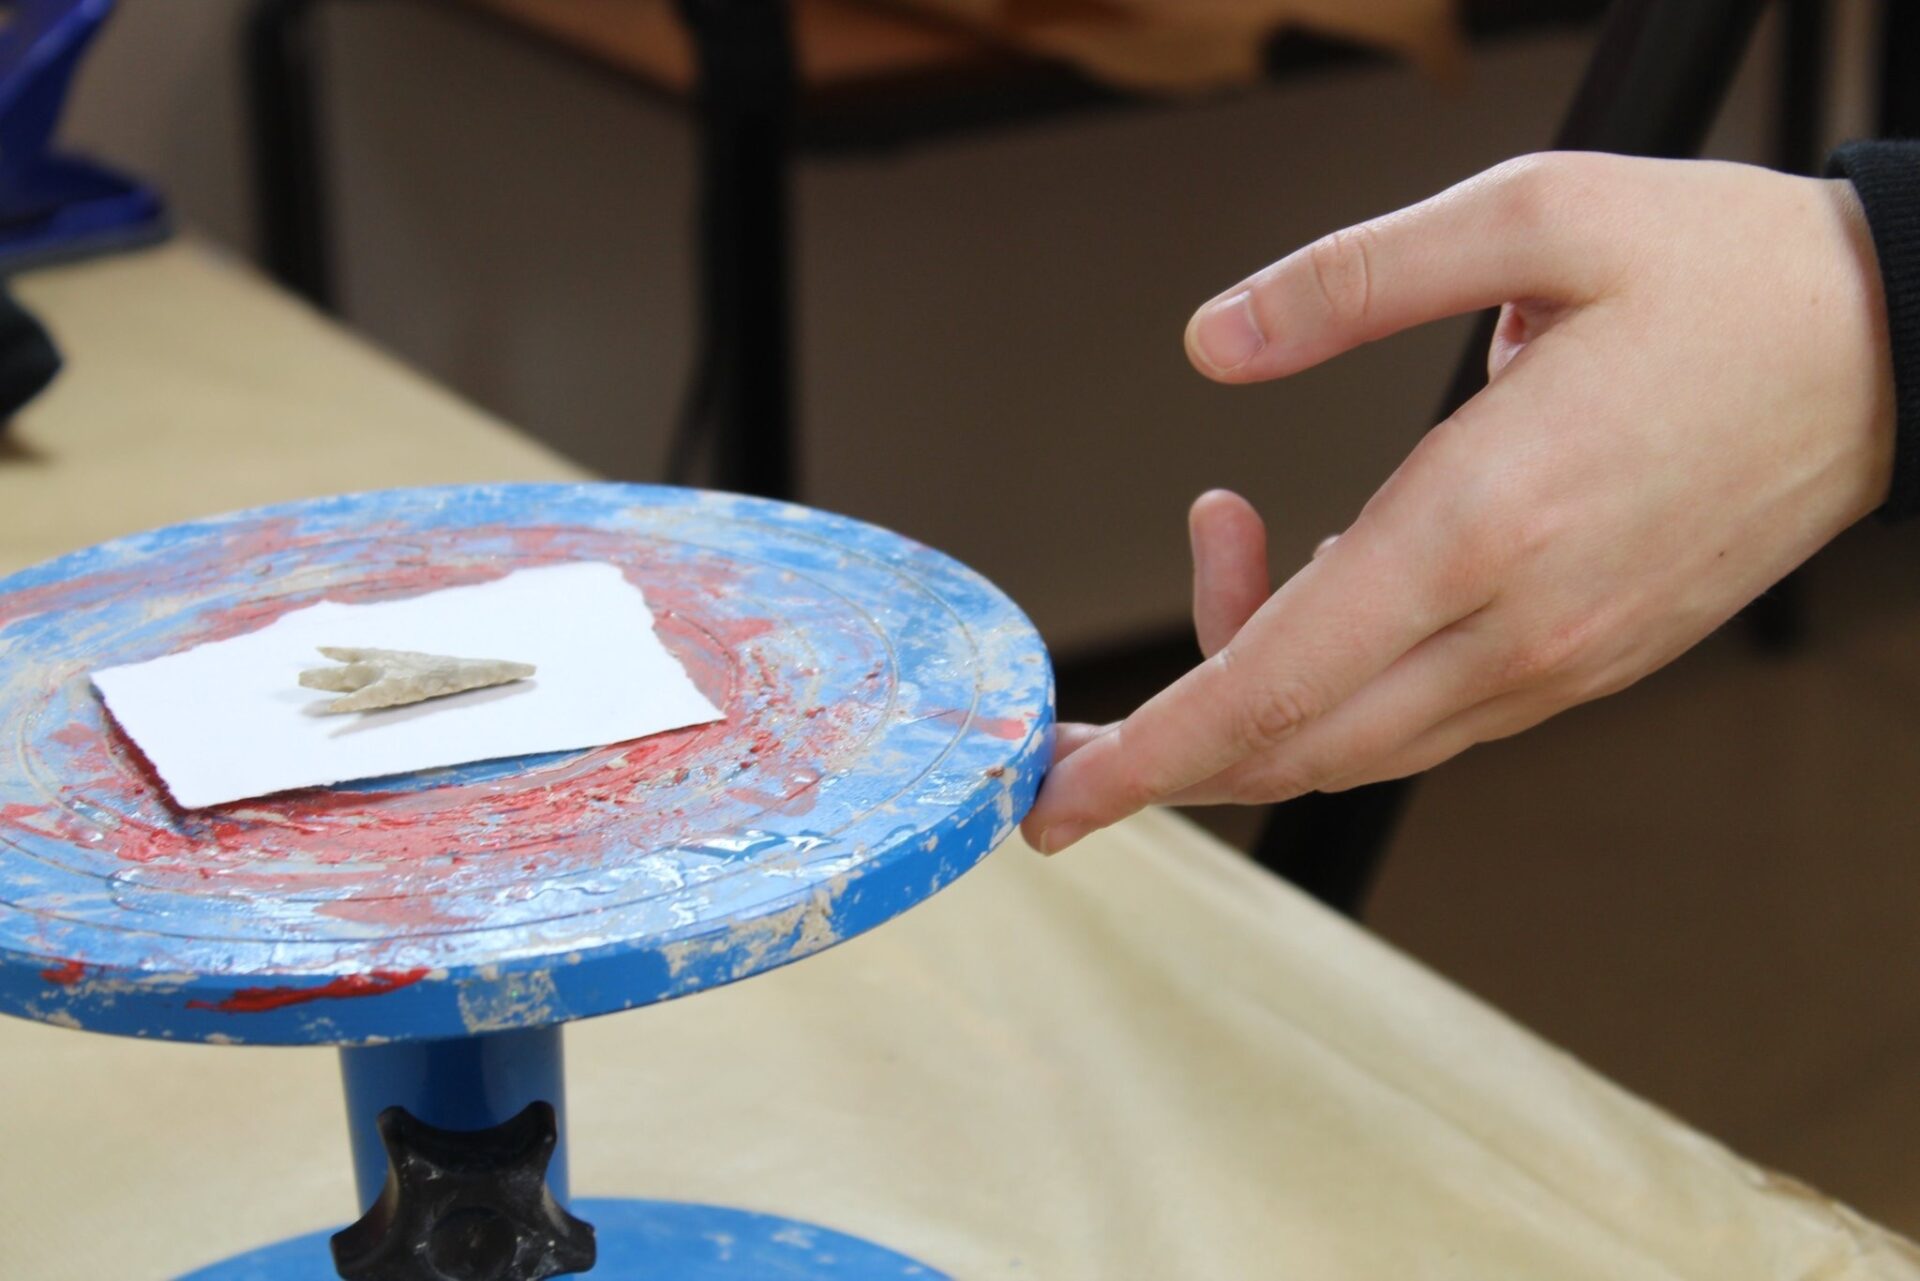 An arrowhead on a piece of white paper and a blue and red marked turntable with Artist Alice Martin's hand in shot.